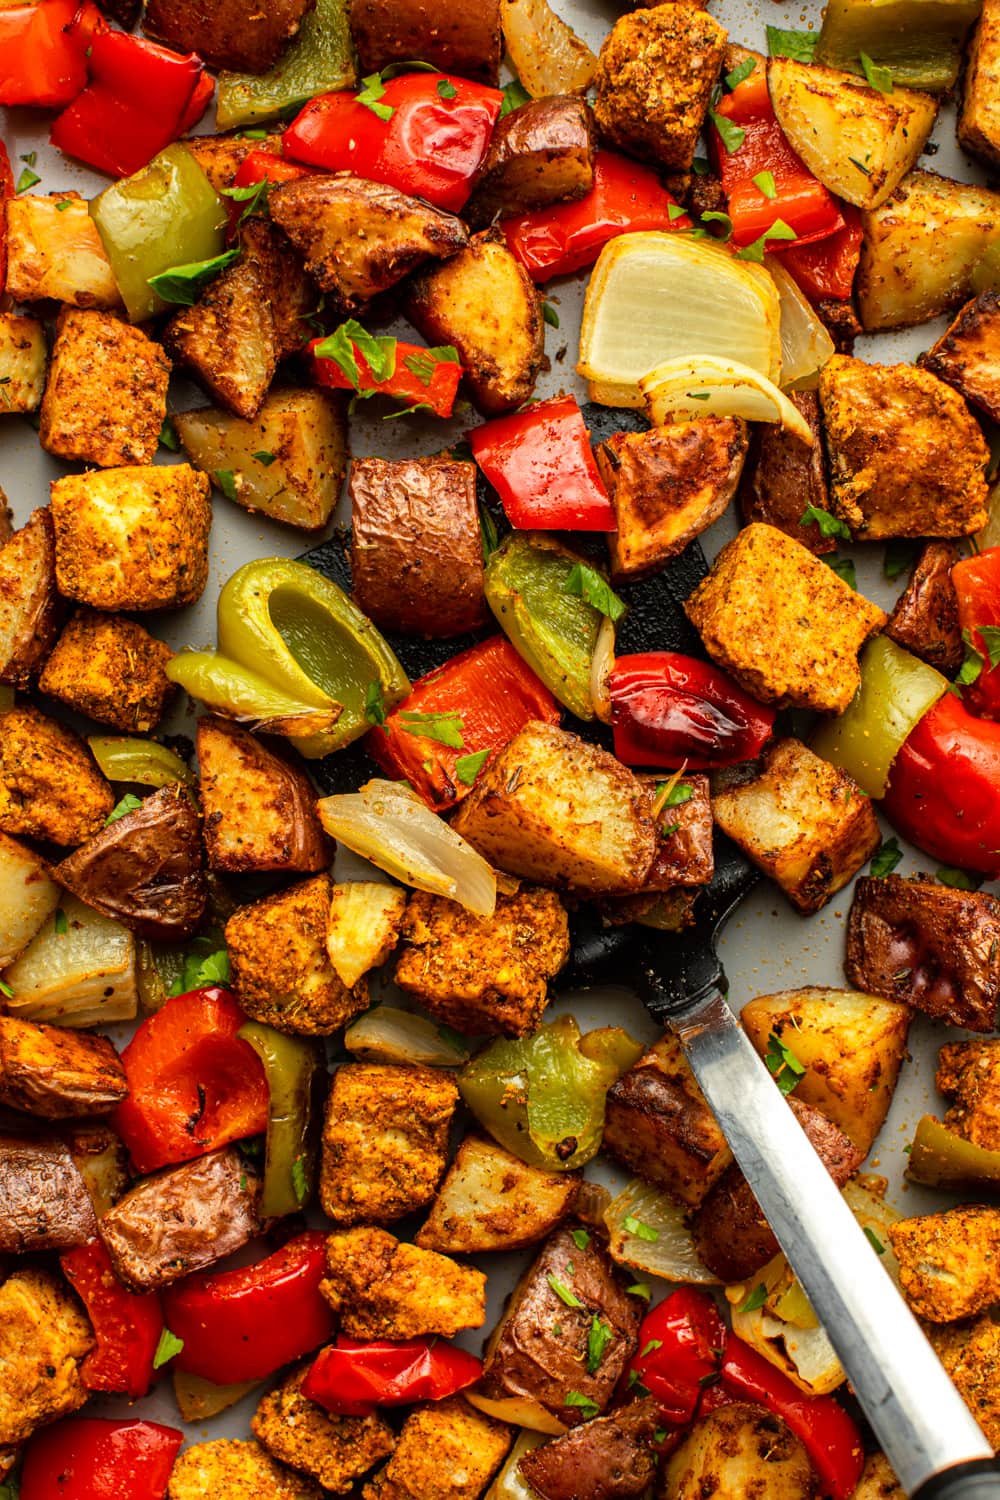 a zoomed in image of cajun tofu and veggies